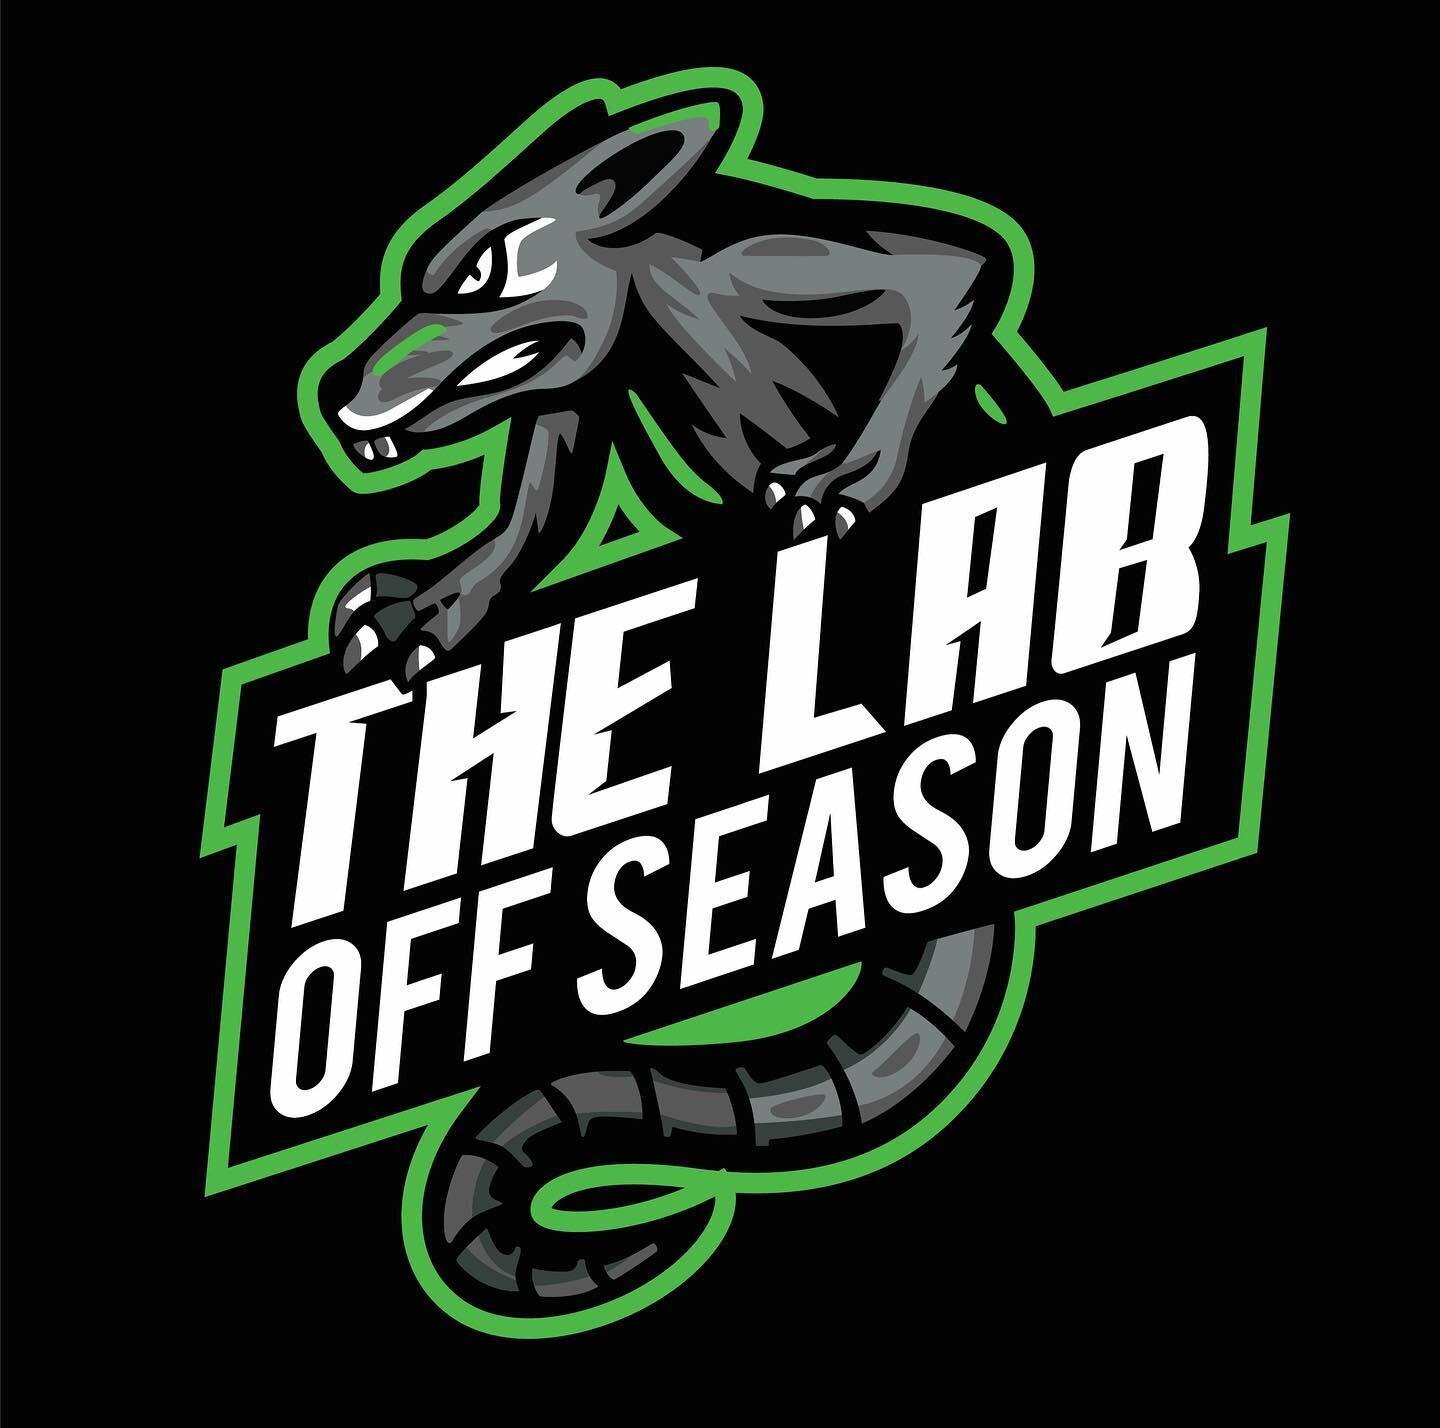 💥 Introducing The Lab OFFSEASON training program 💥

💻&mdash;-&gt; see link in bio for full details and to sign up 

The Nelson Sport Lab is offering small group training for designed for competitive athletes in the Kootenay region. 
*
The groups i